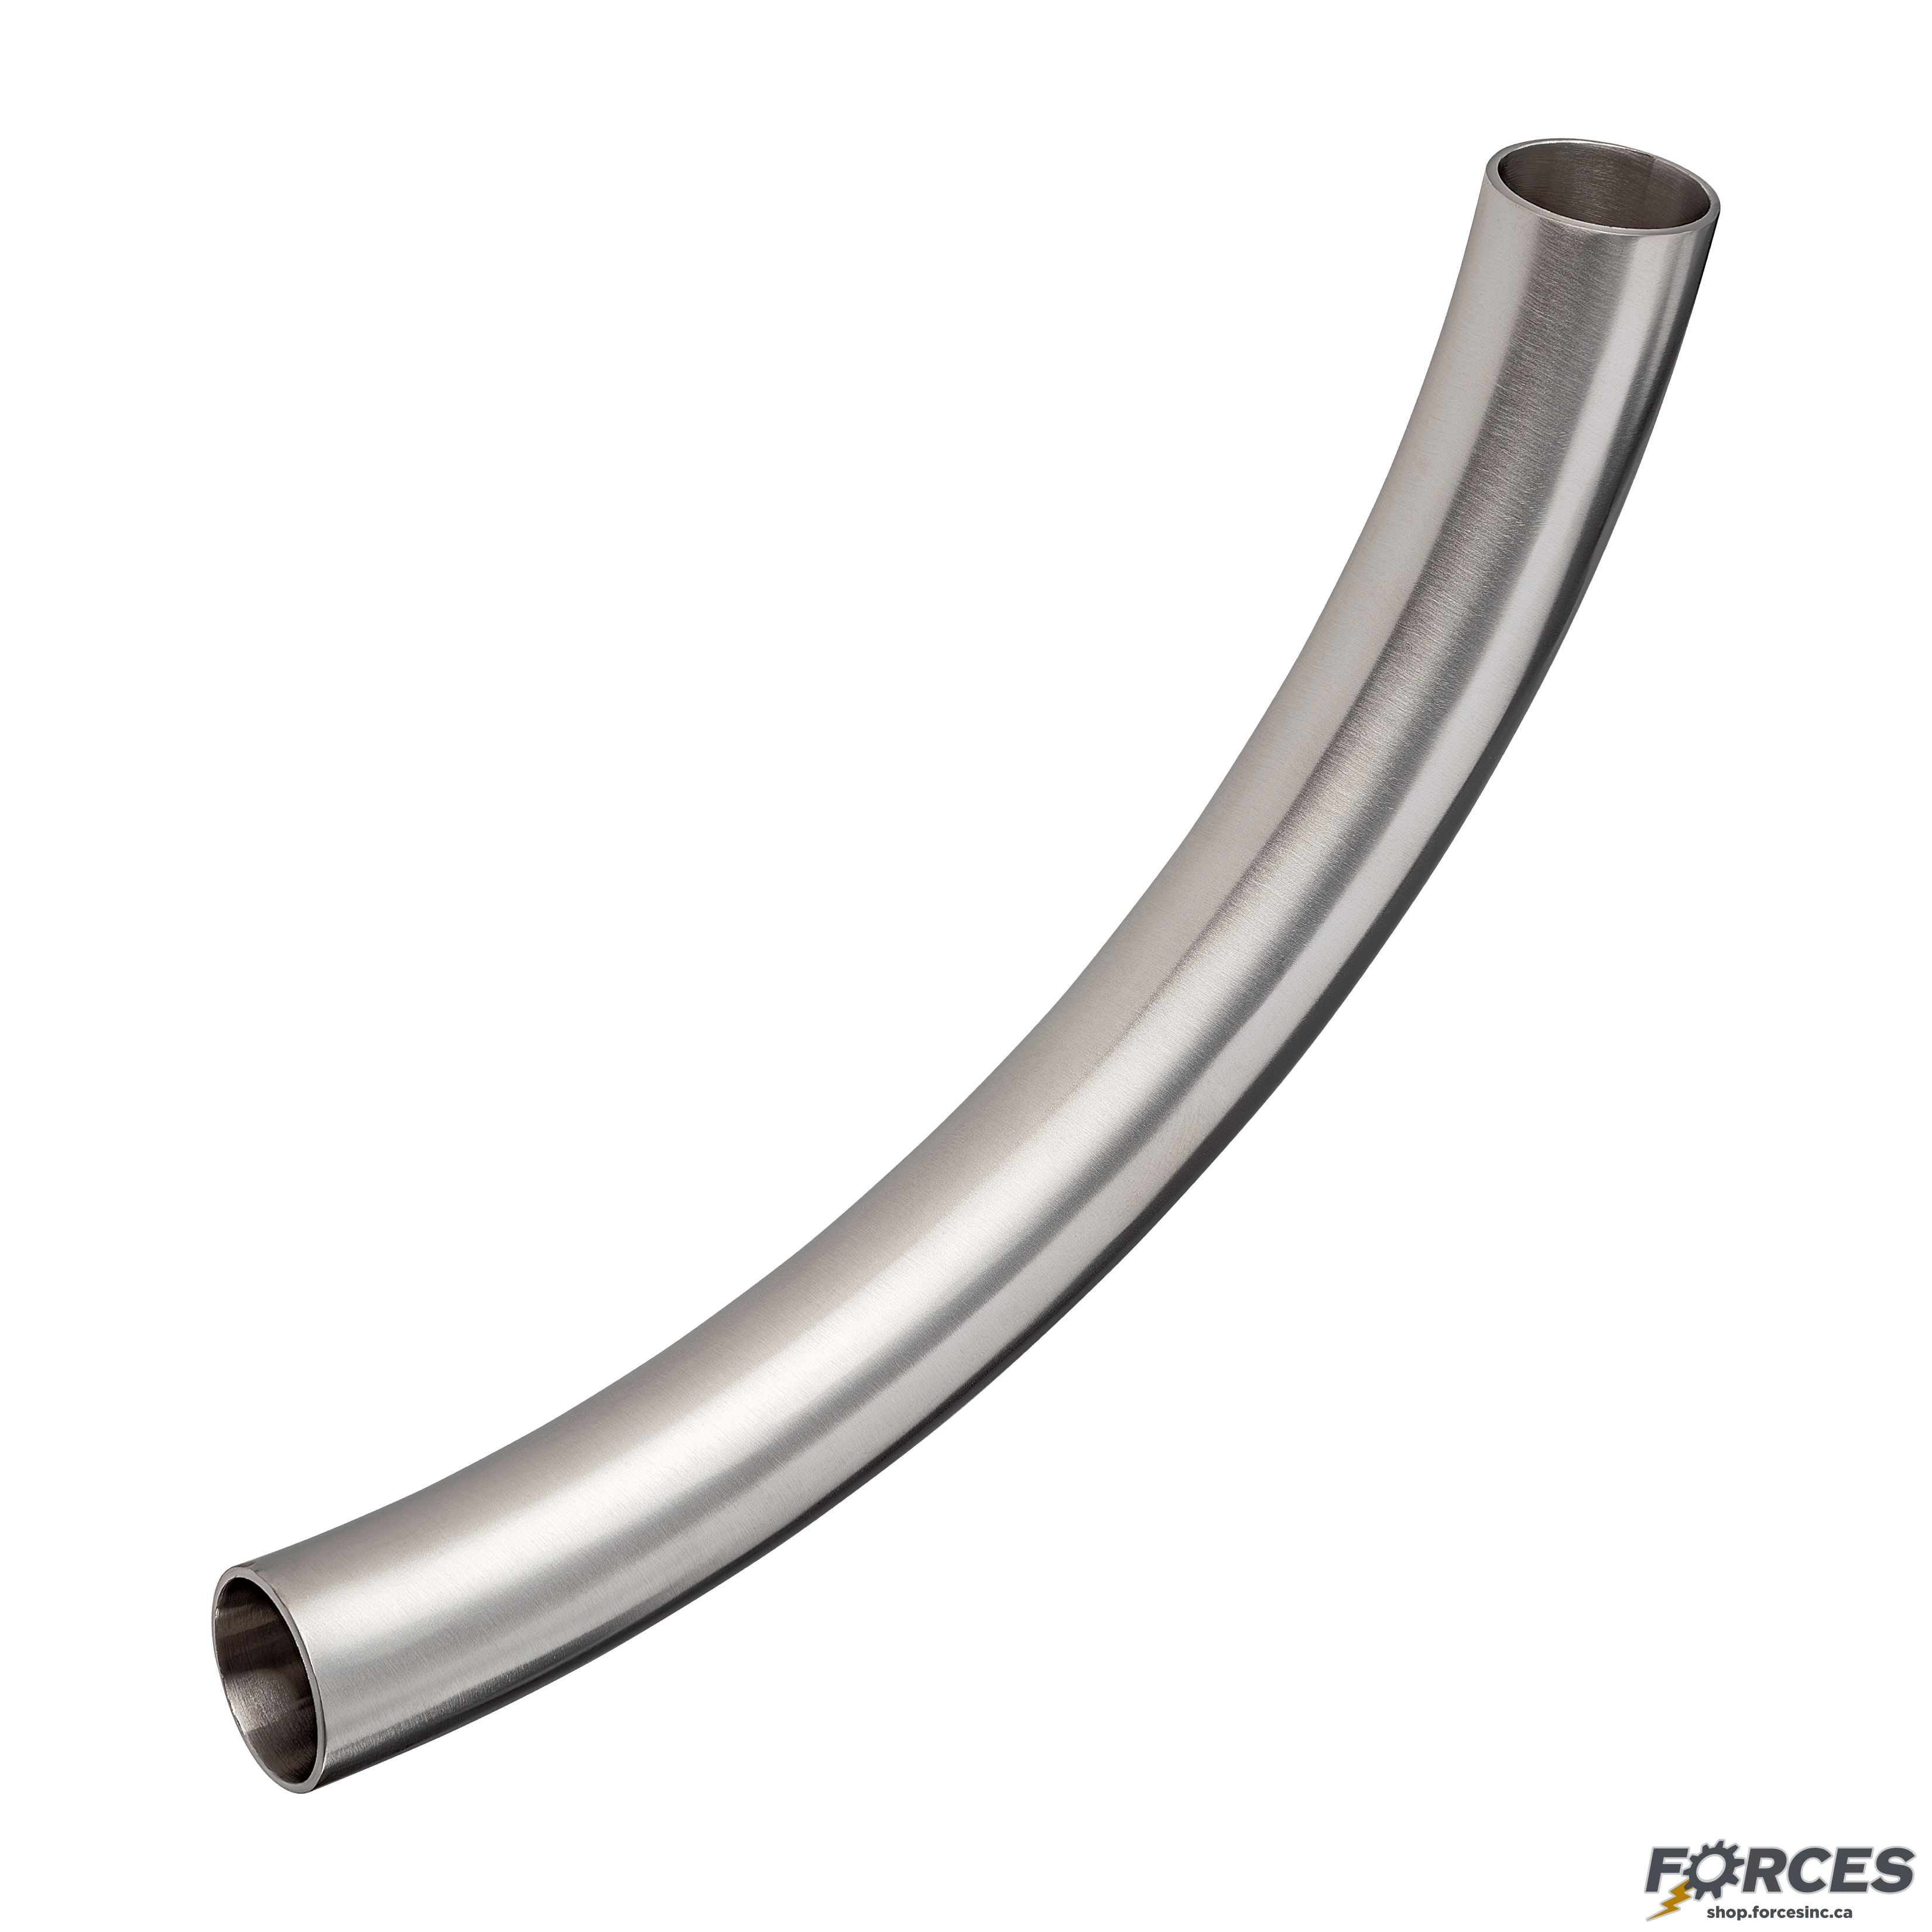 1-1/2" x 9" Butt Weld 90° Elbow Long Radius - Stainless Steel 304 - Forces Inc